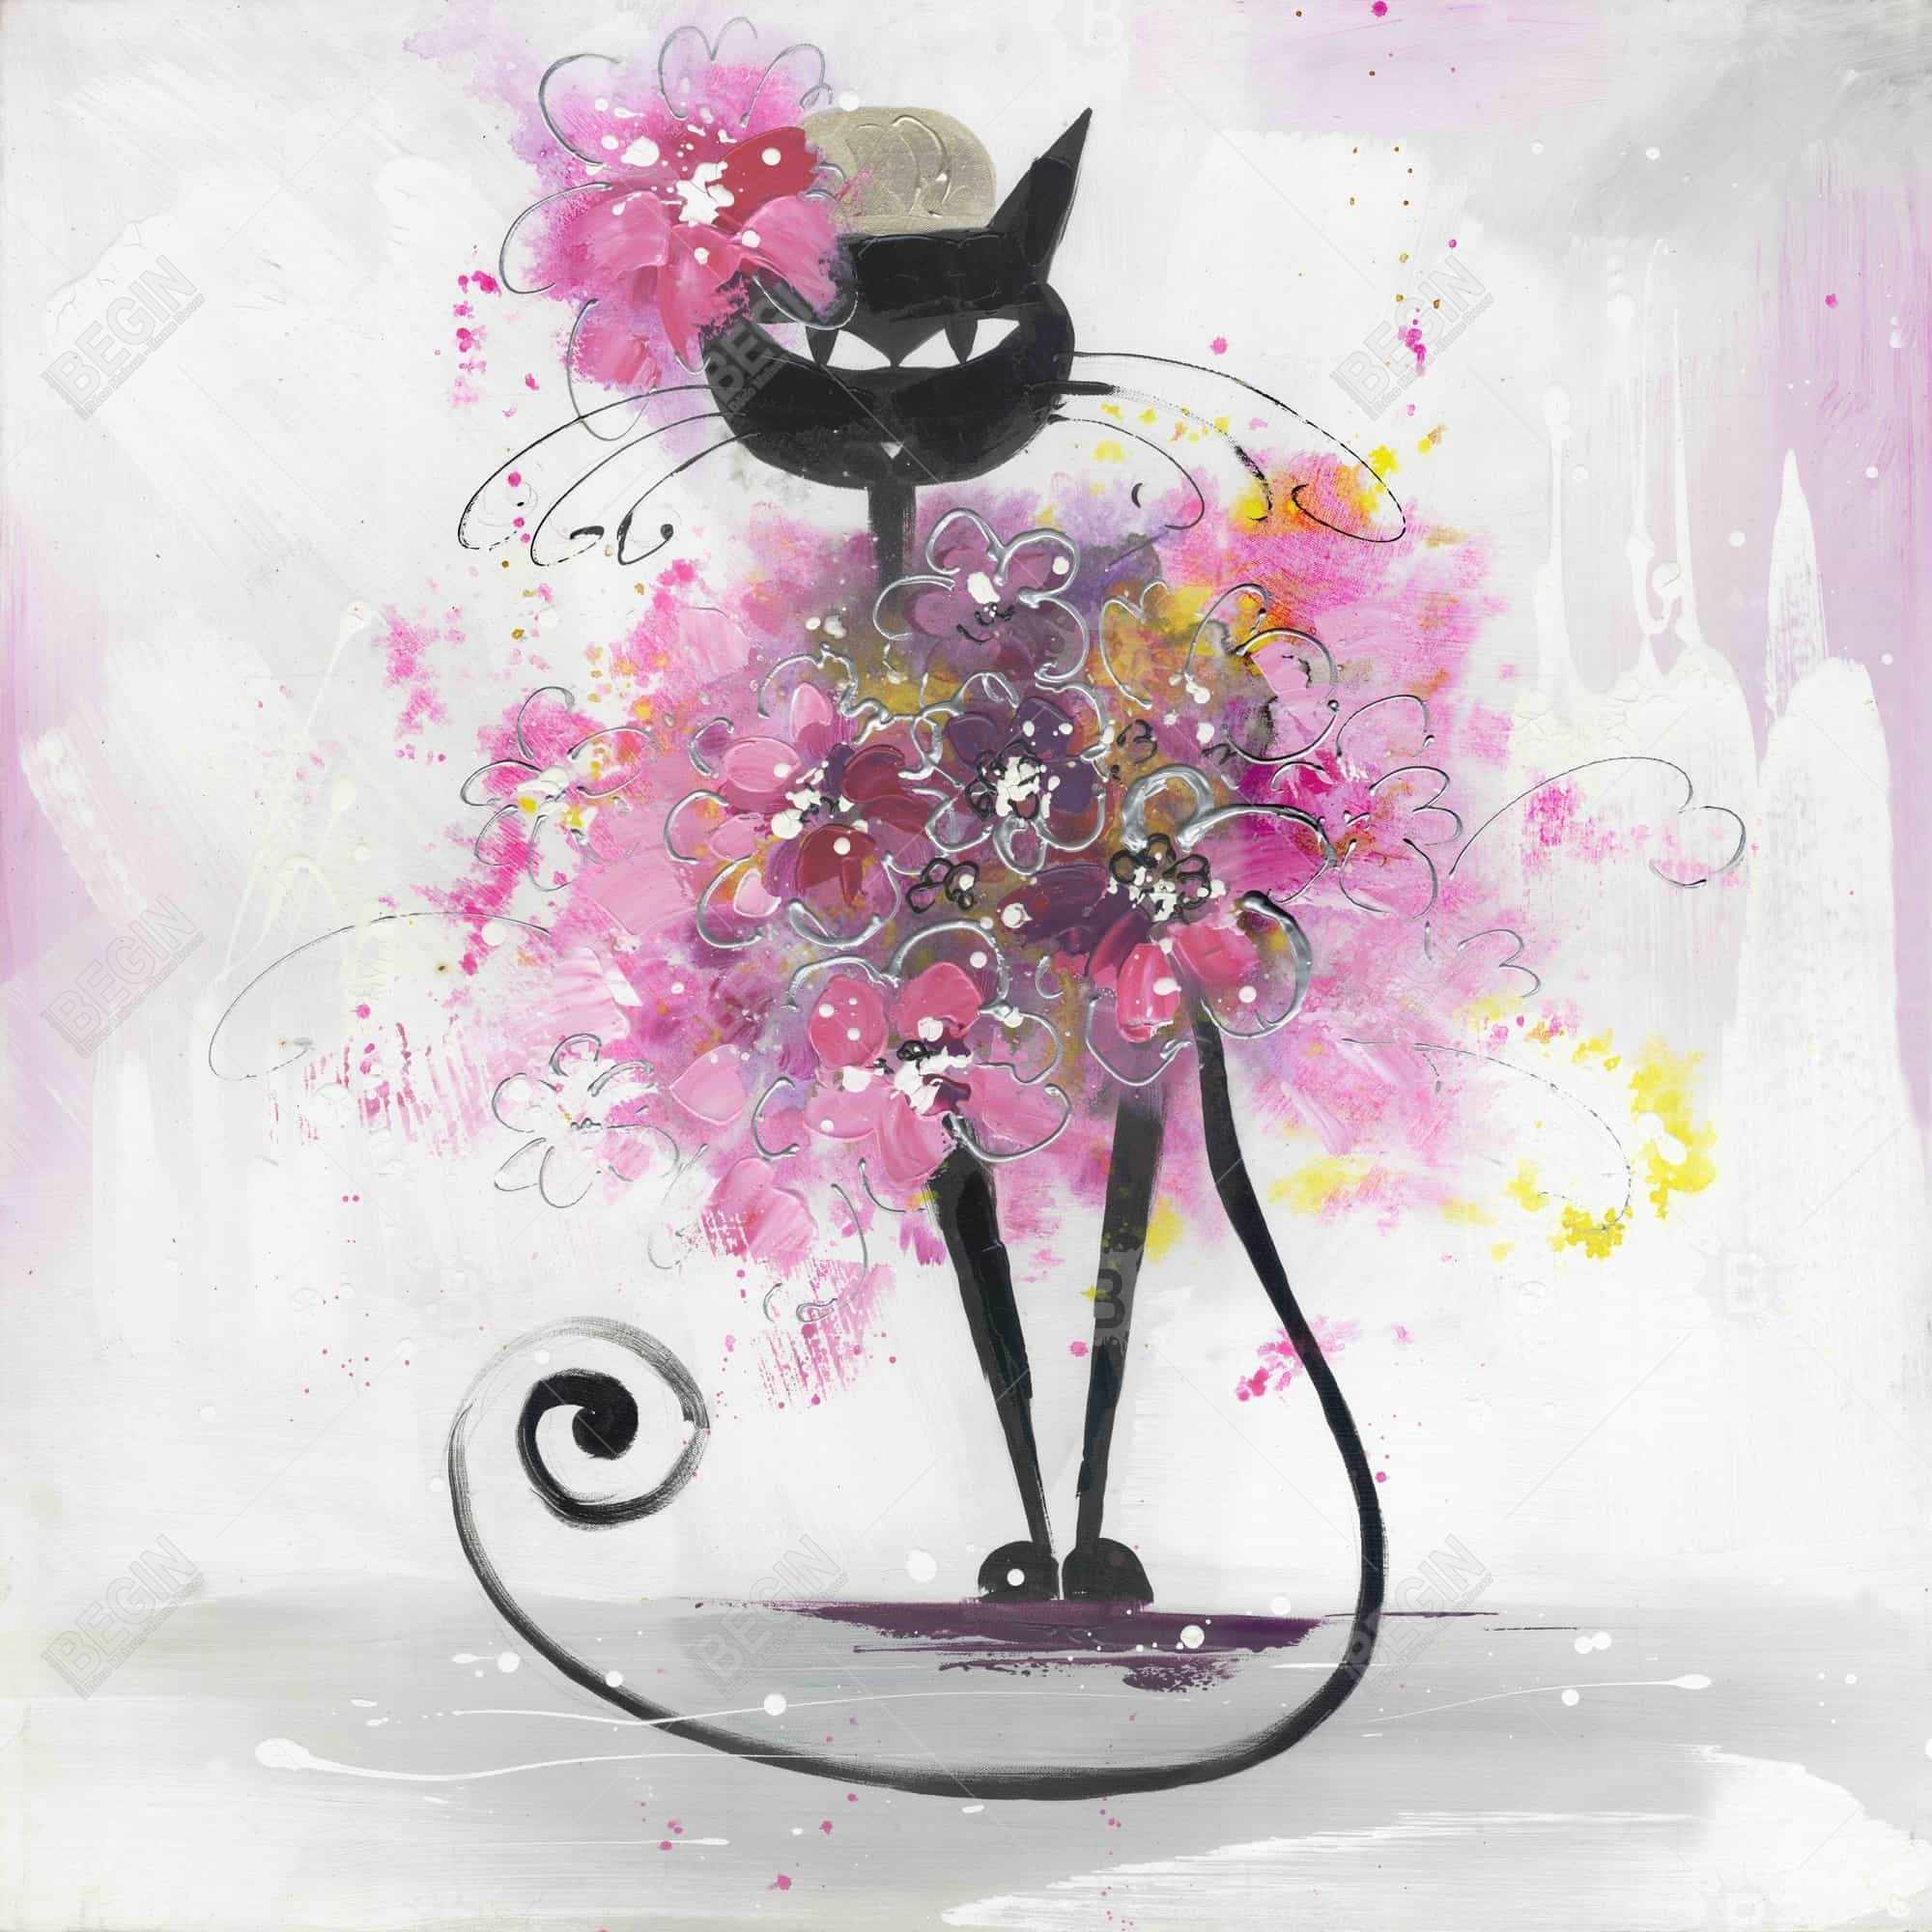 Cartoon cat with pink flowers